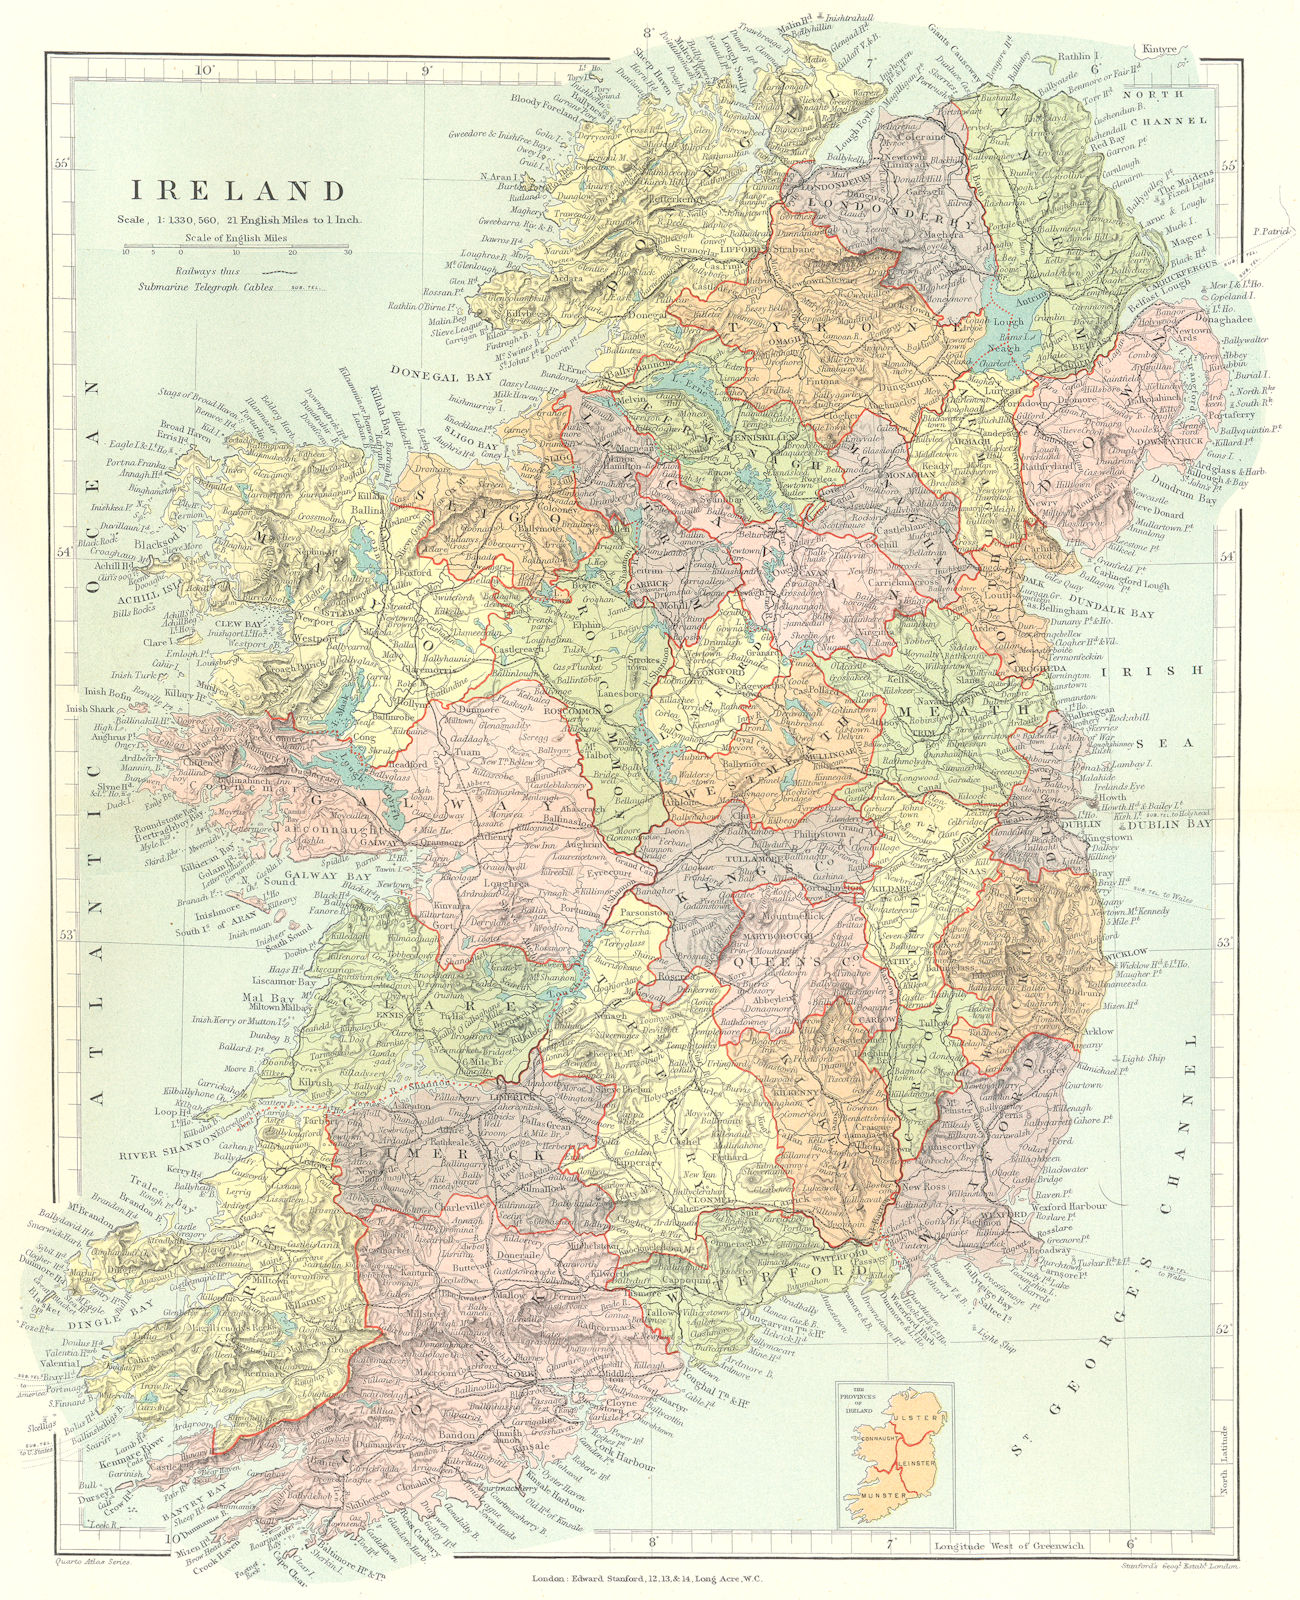 IRELAND. Showing counties, railways & towns. STANFORD 1906 old antique map